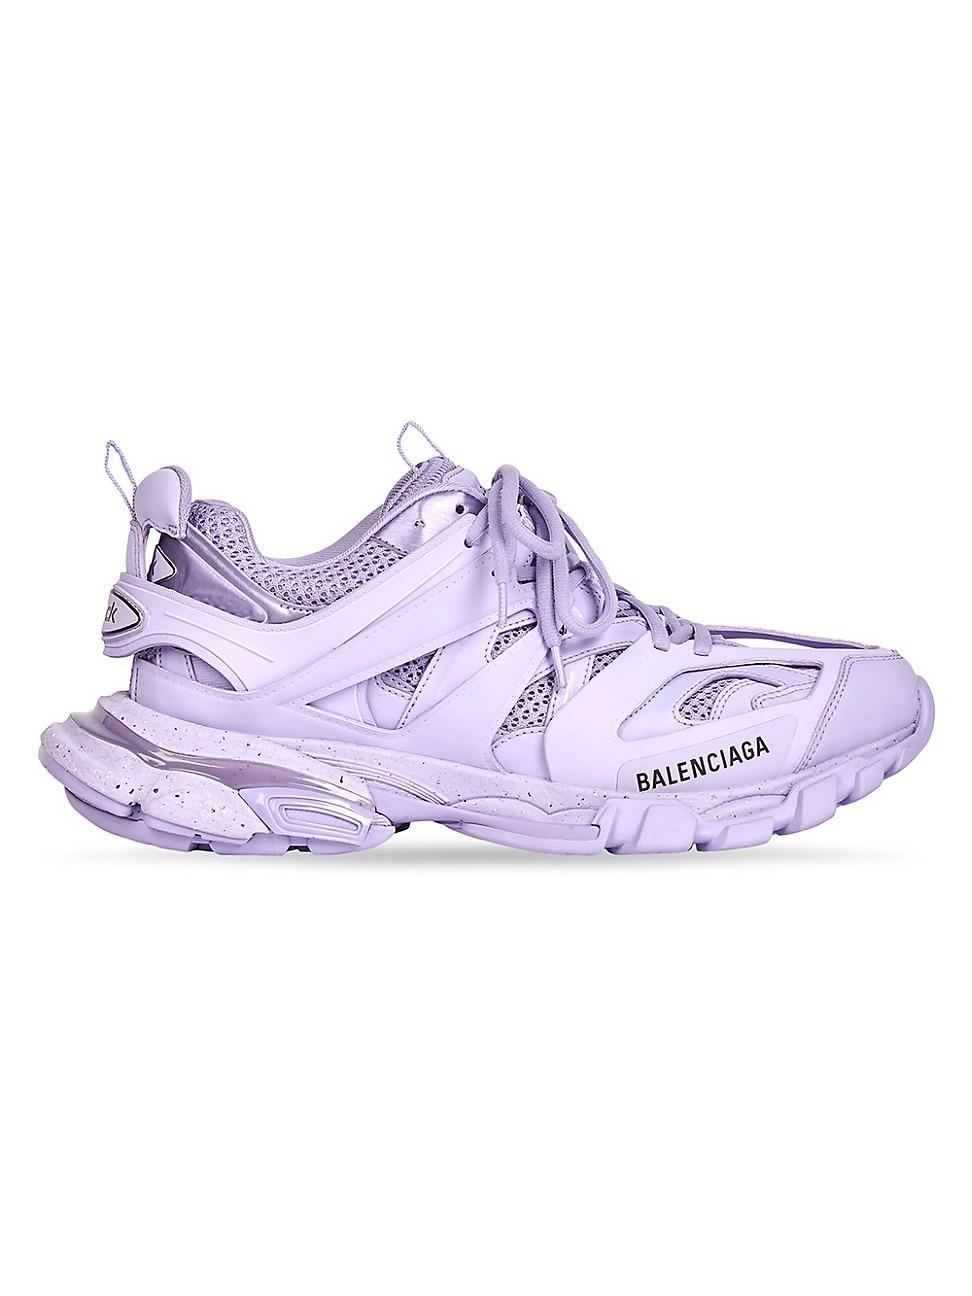 Balenciaga Track Sneaker Recycled Sole In Purple Lyst | lupon.gov.ph